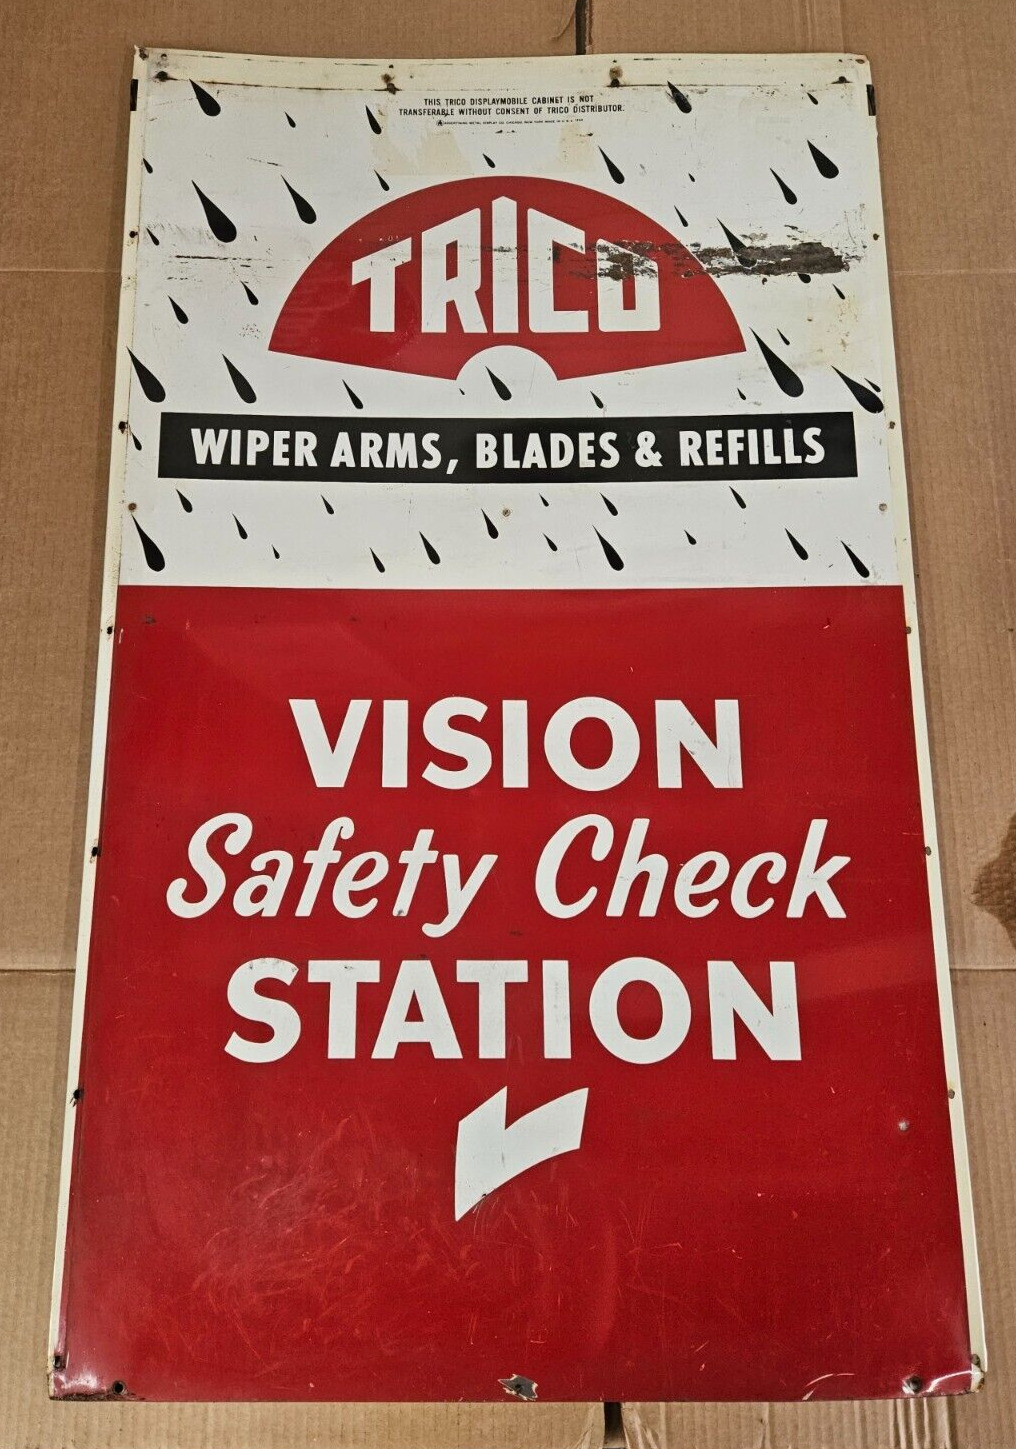 VINTAGE Trico SIGN Wiper Arms Blades refills Cabinet Panel ADVERTISING